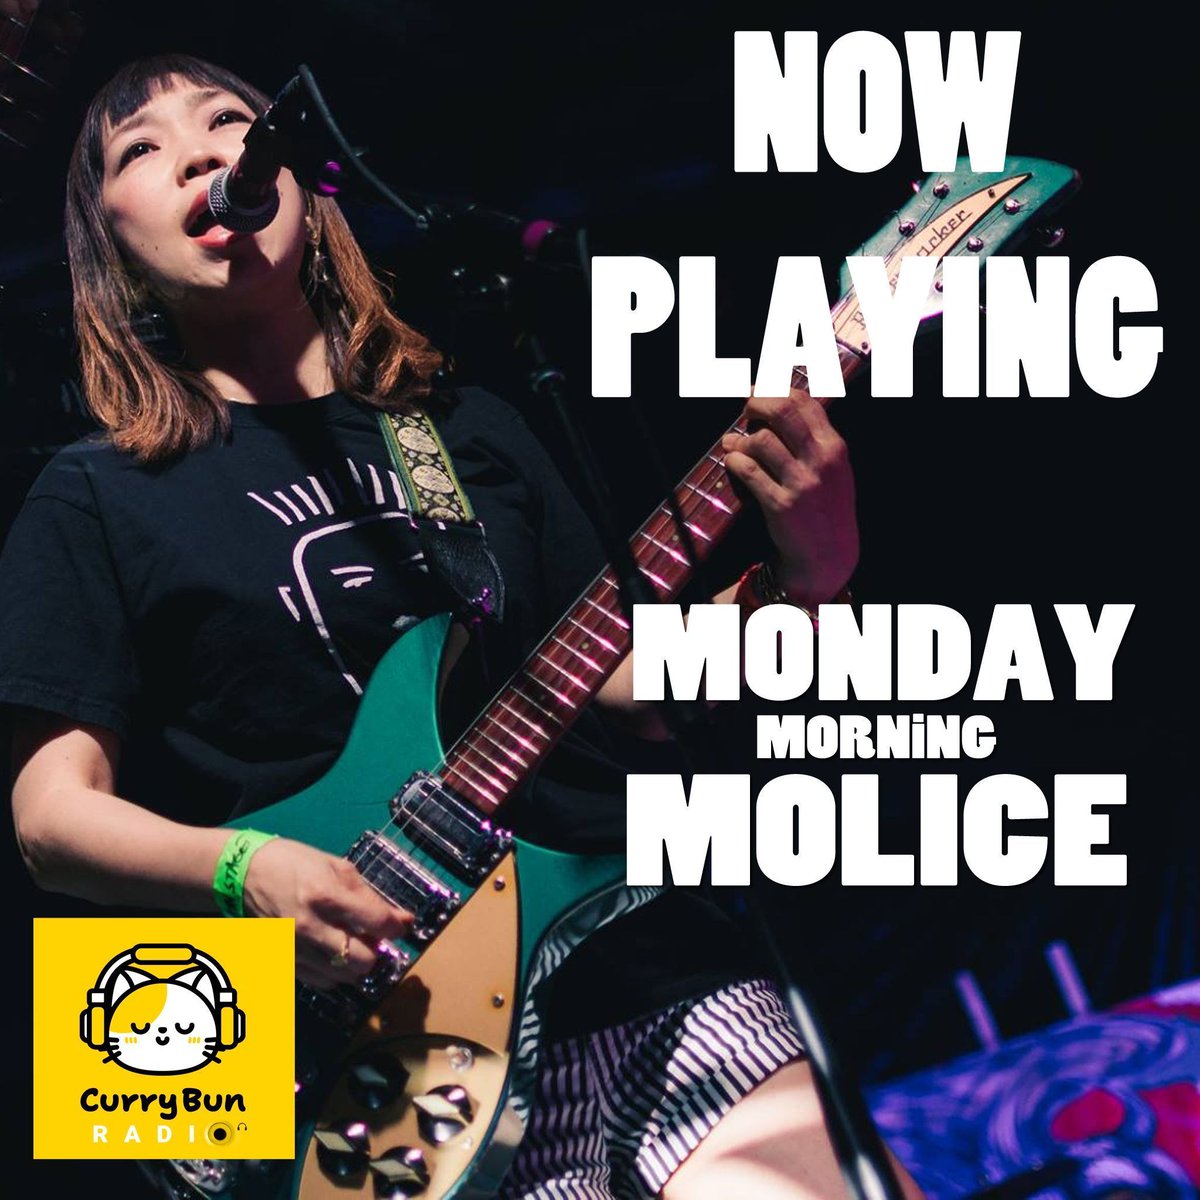 currybun.net/artist/card-3-… 
Hey kids! Ya' know what time it is? That's right. It's time for #MondayMorningMolice
#NowPlaying on #CurryBunRadio #
 #themolice #postpunk #dancecore #jrock #Jappanese #MondayMorningJoy